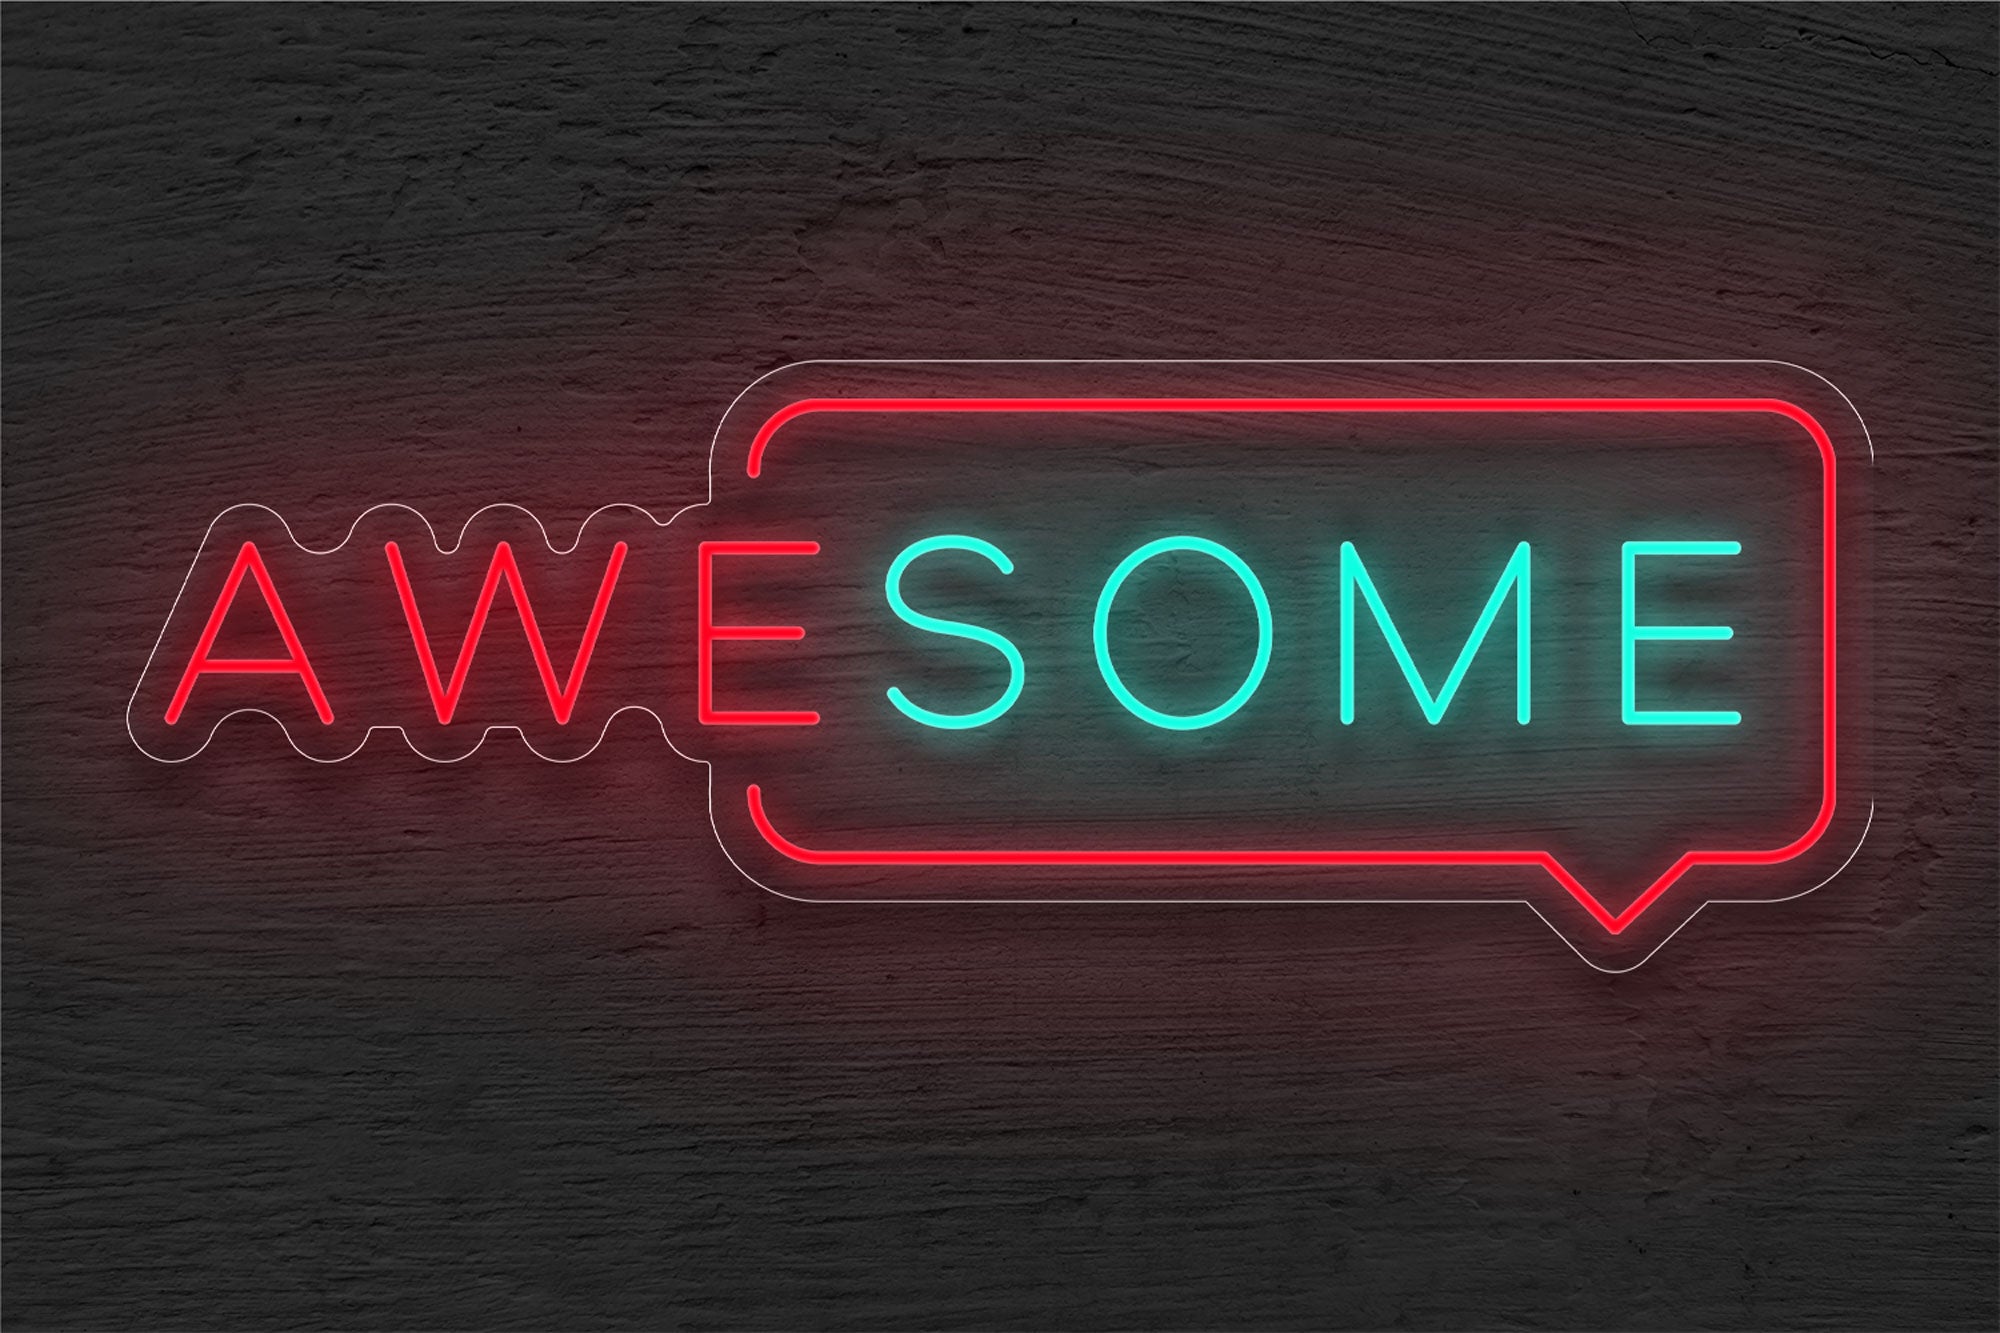 "Awesome" with Callout Border LED Neon Sign